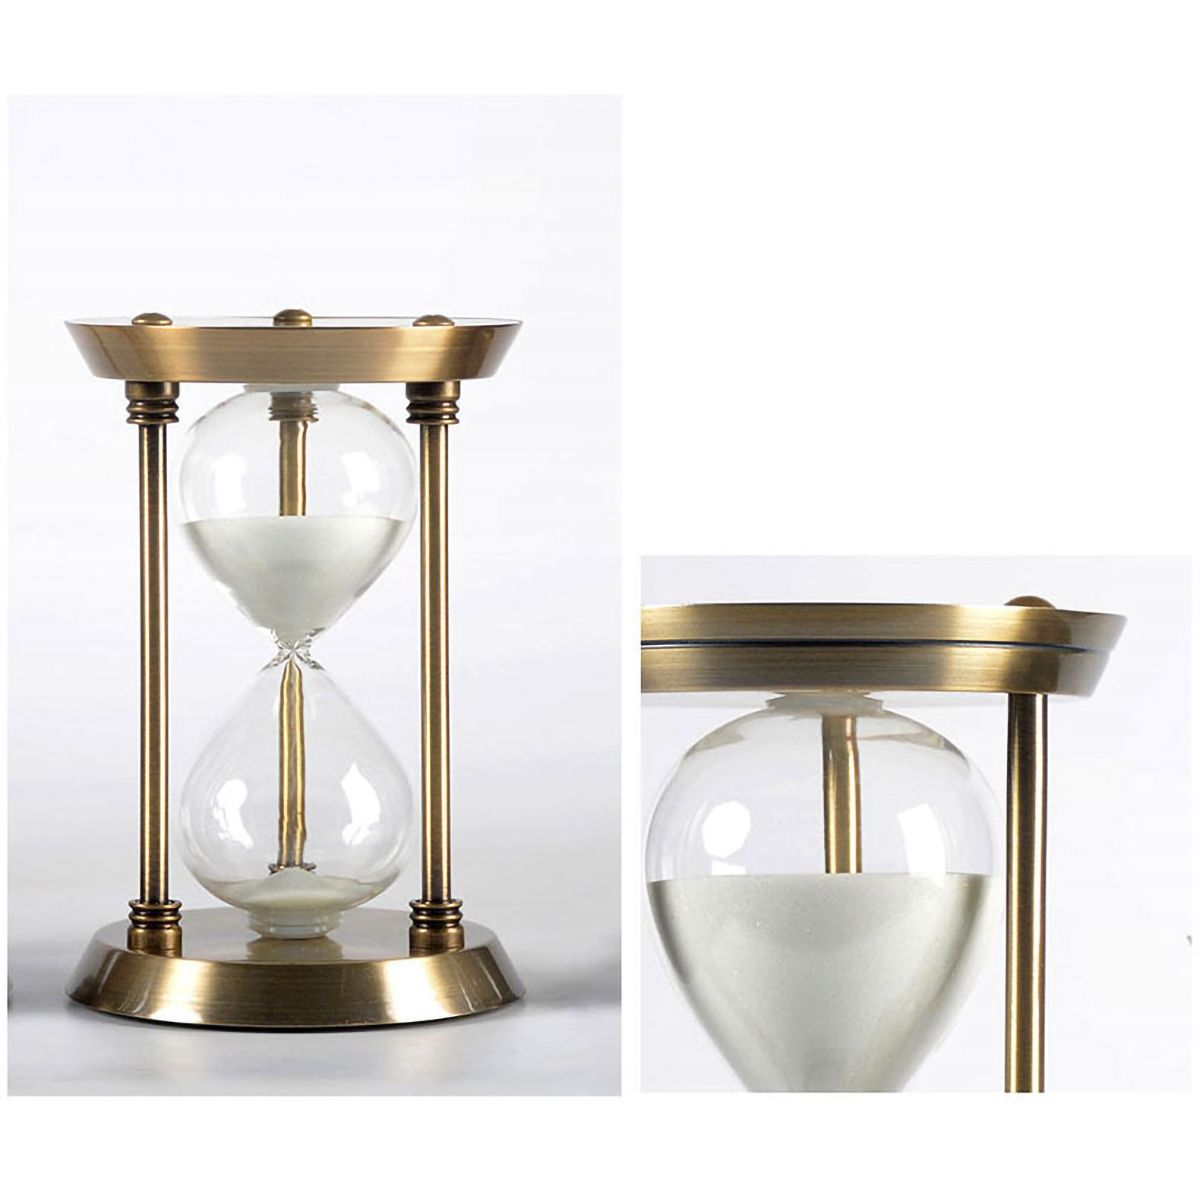 Metal-Hourglass-Timer-Decoration-Creative-Birthday-Business-Gift-Gold-15-Minutes-1426719